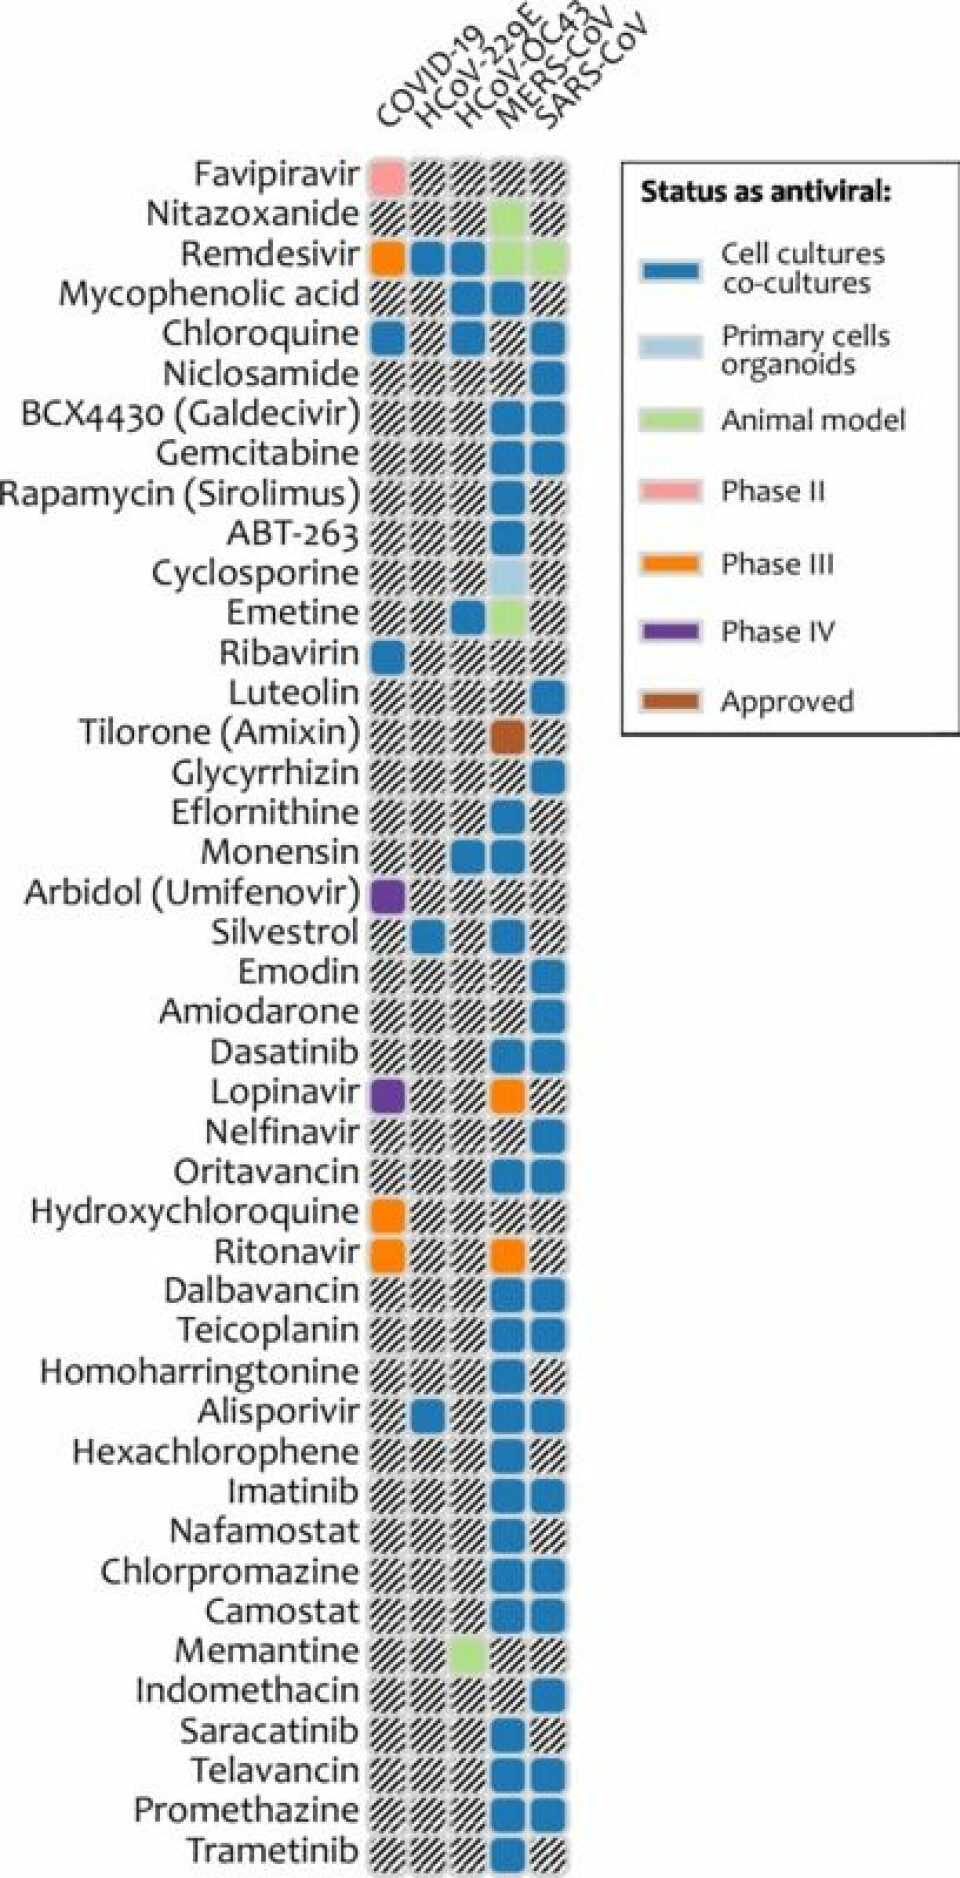 Safe-in-man broad-spectrum antiviral agents and coronaviruses they inhibit, from https://drugvirus.info/ website. Different shadings indicate different development status of BSAAs. Grey shading indicates that the antiviral activity has not been either studied or reported.